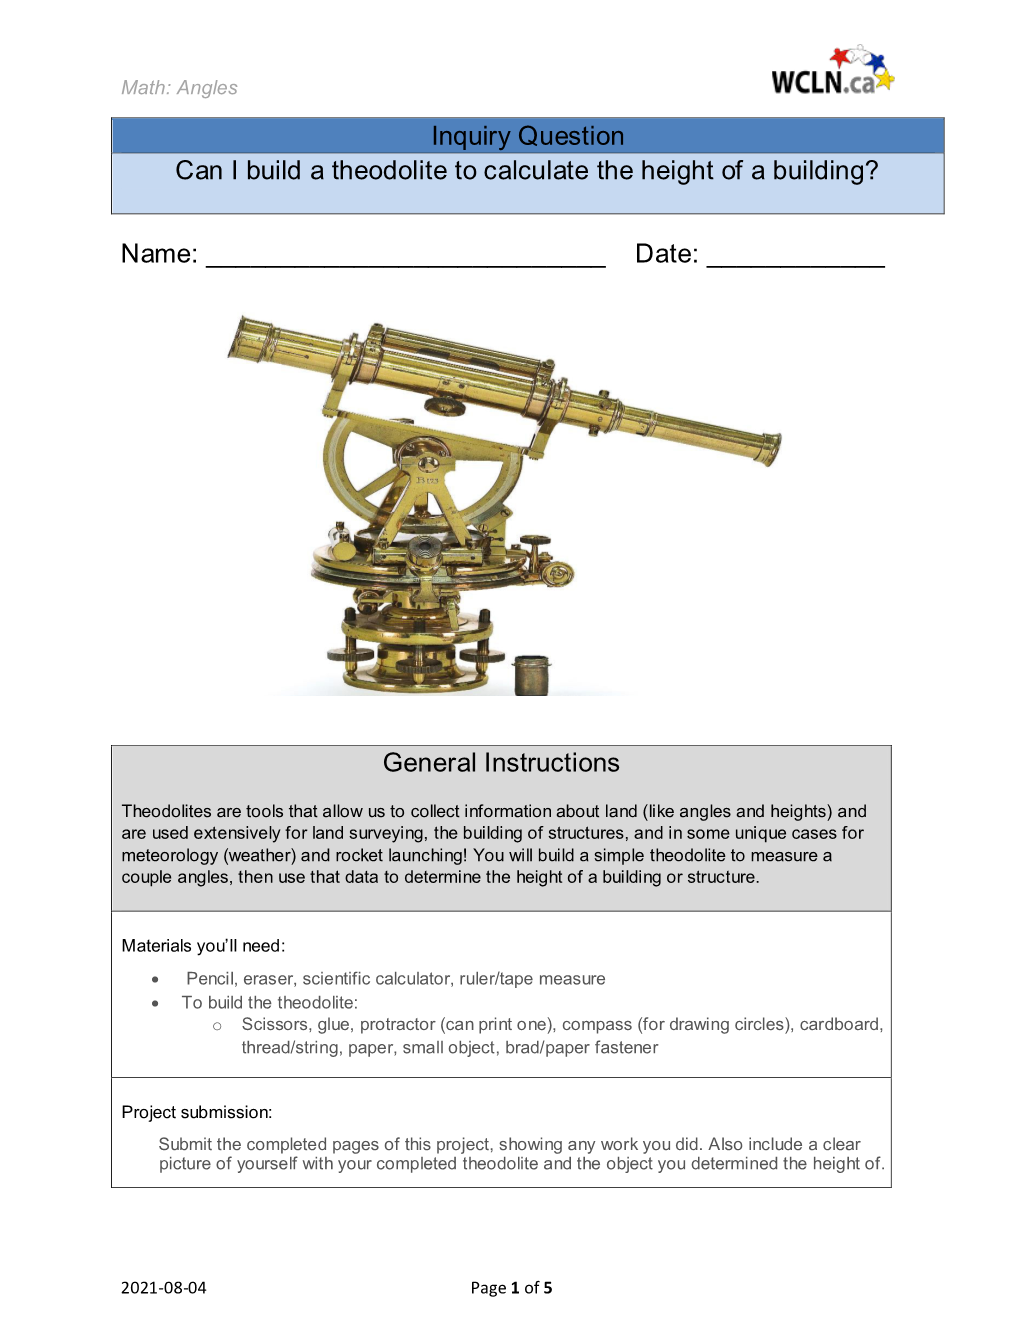 Inquiry Question Can I Build a Theodolite to Calculate the Height of a Building?